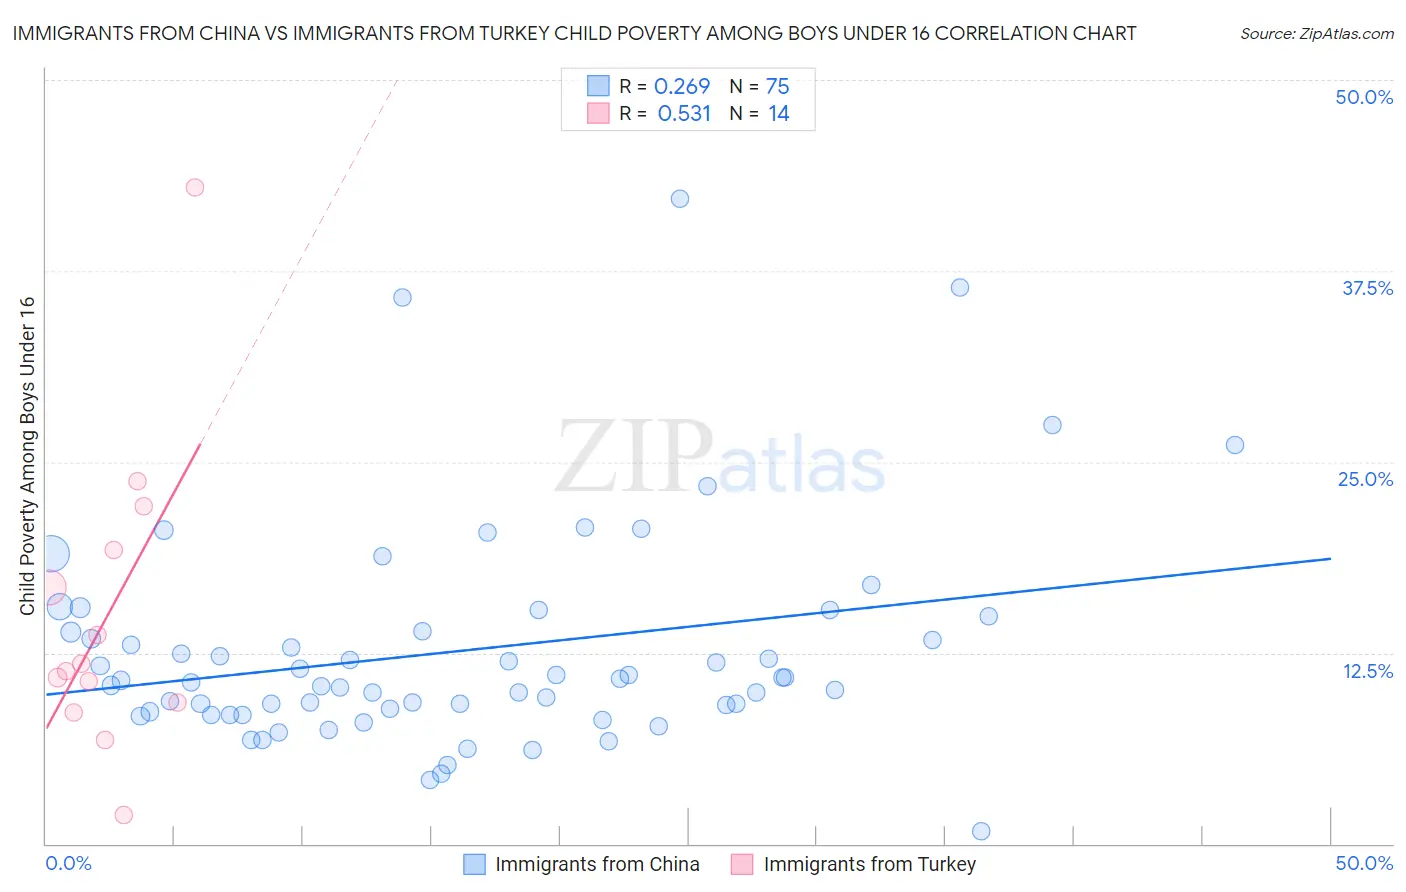 Immigrants from China vs Immigrants from Turkey Child Poverty Among Boys Under 16